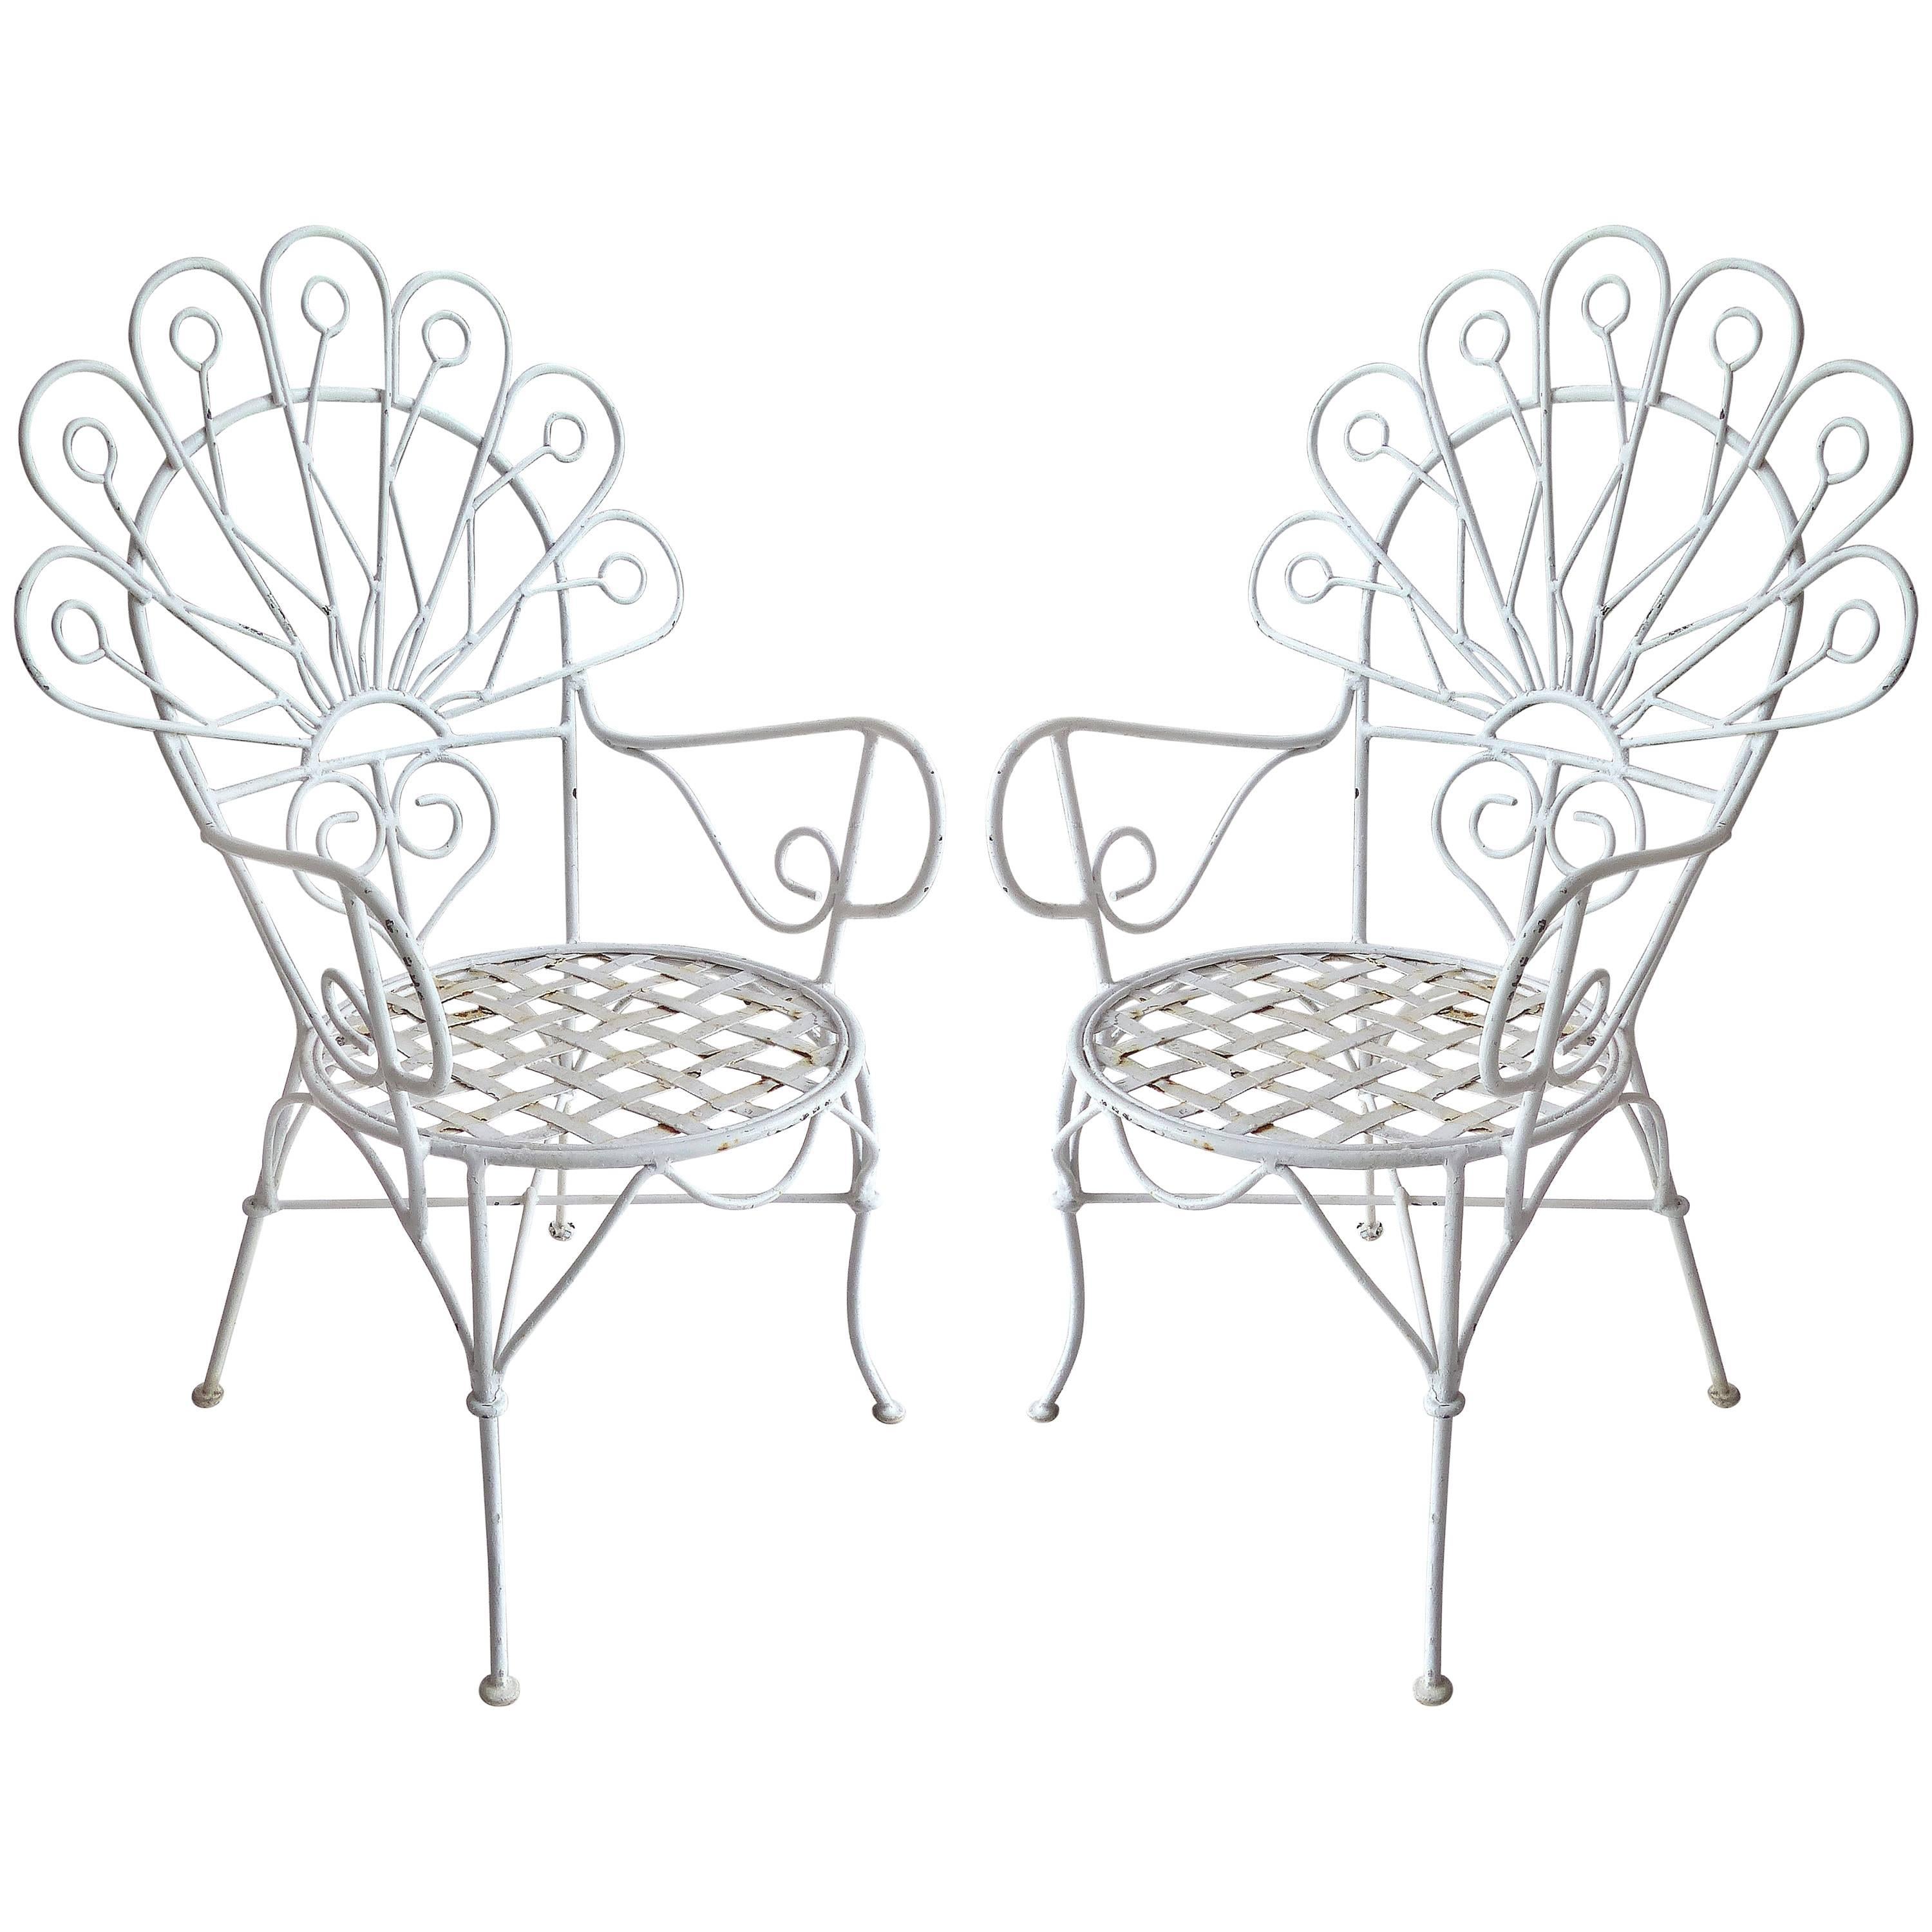 Pair of Whimsical 1940s Hollywood Regency "Peacock" Painted Iron Garden Chairs